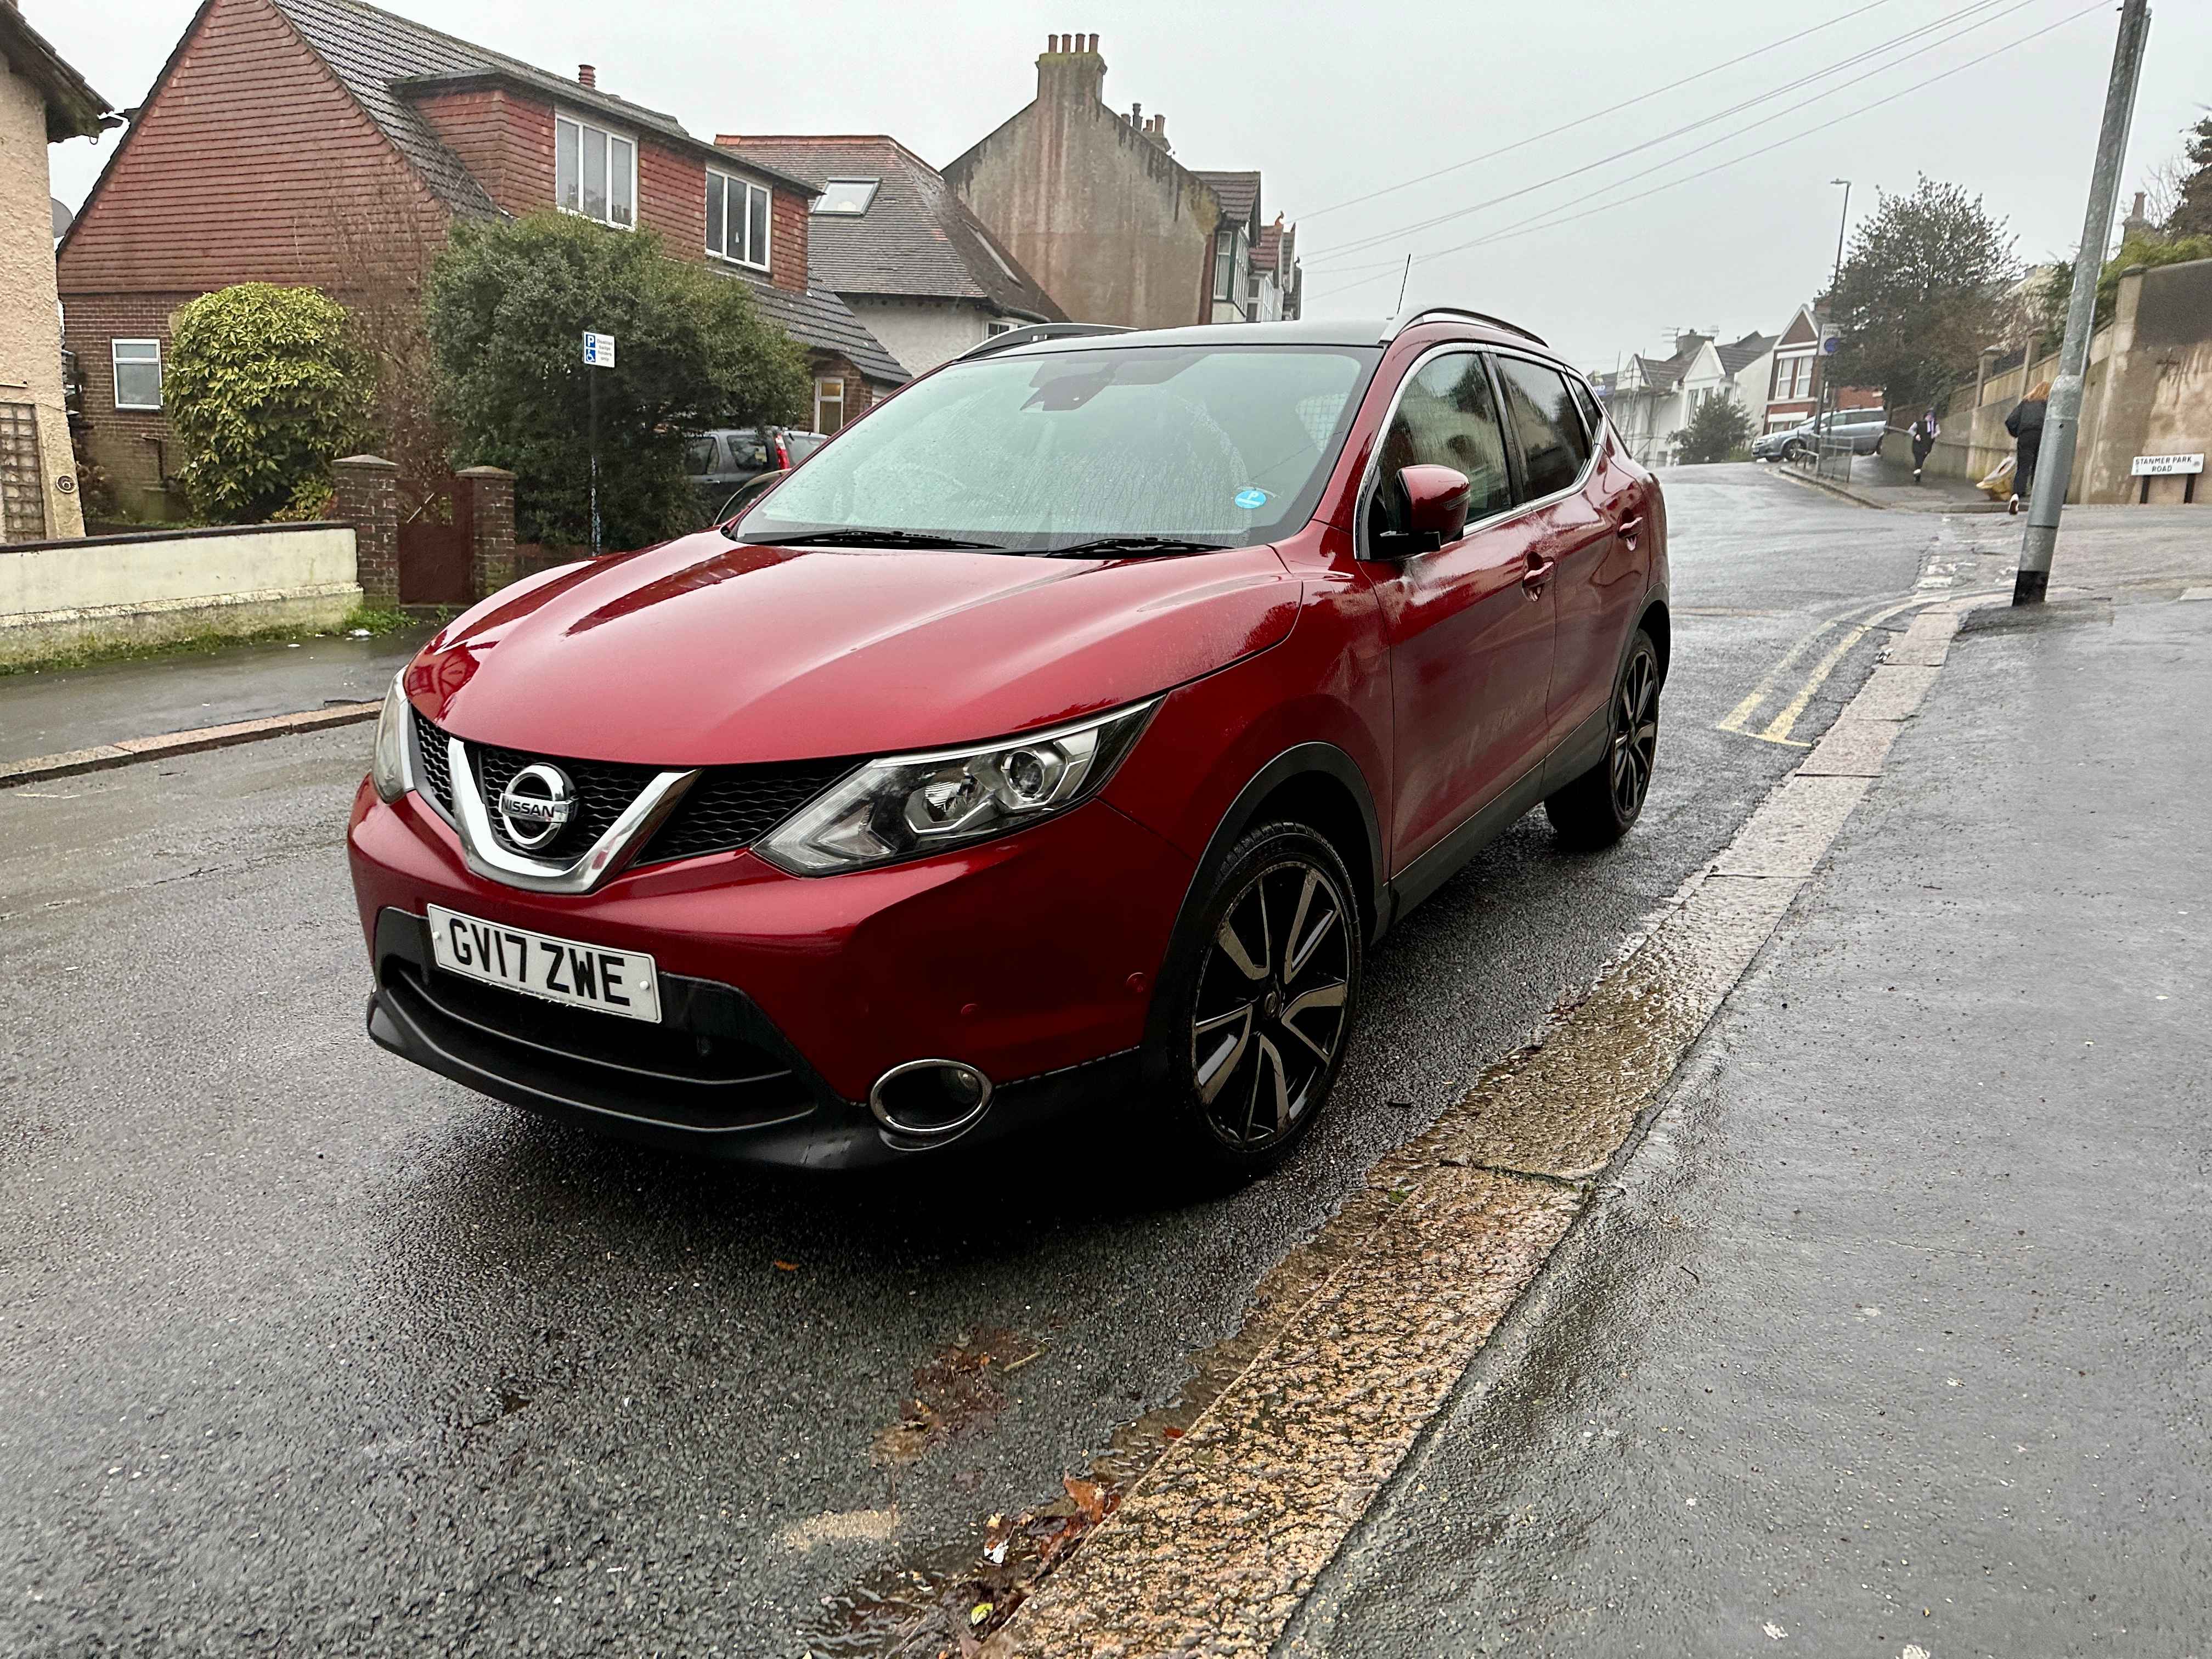 Photograph of GV17 ZWE - a Red Nissan Qashqai parked in Hollingdean by a non-resident. The fourth of four photographs supplied by the residents of Hollingdean.